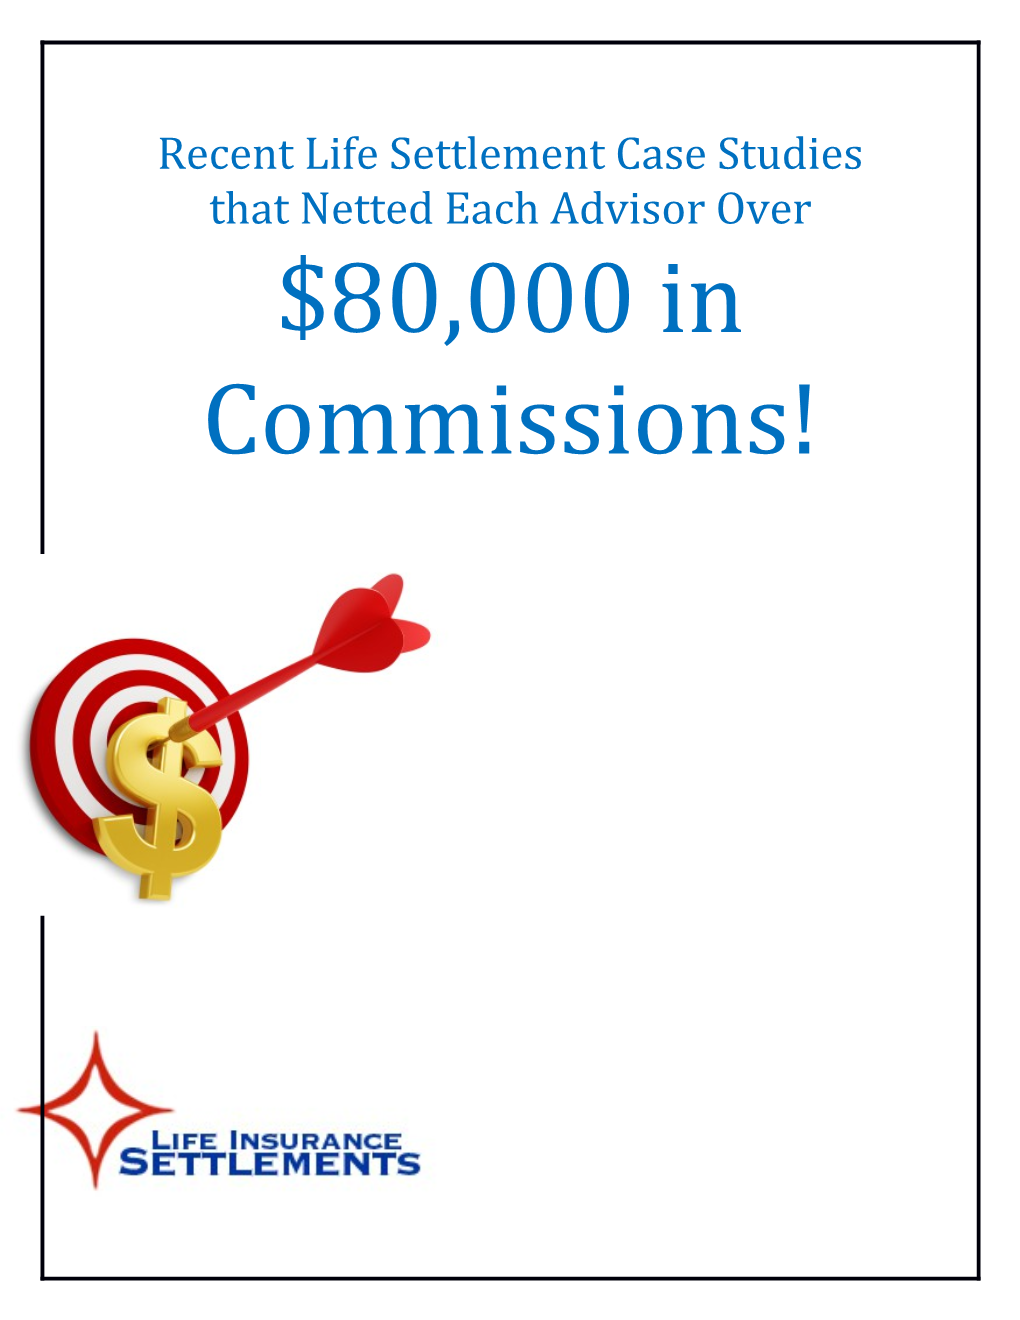 Recent Life Settlement Case Studies That Netted Each Advisor Over$80,000 in Commissions!